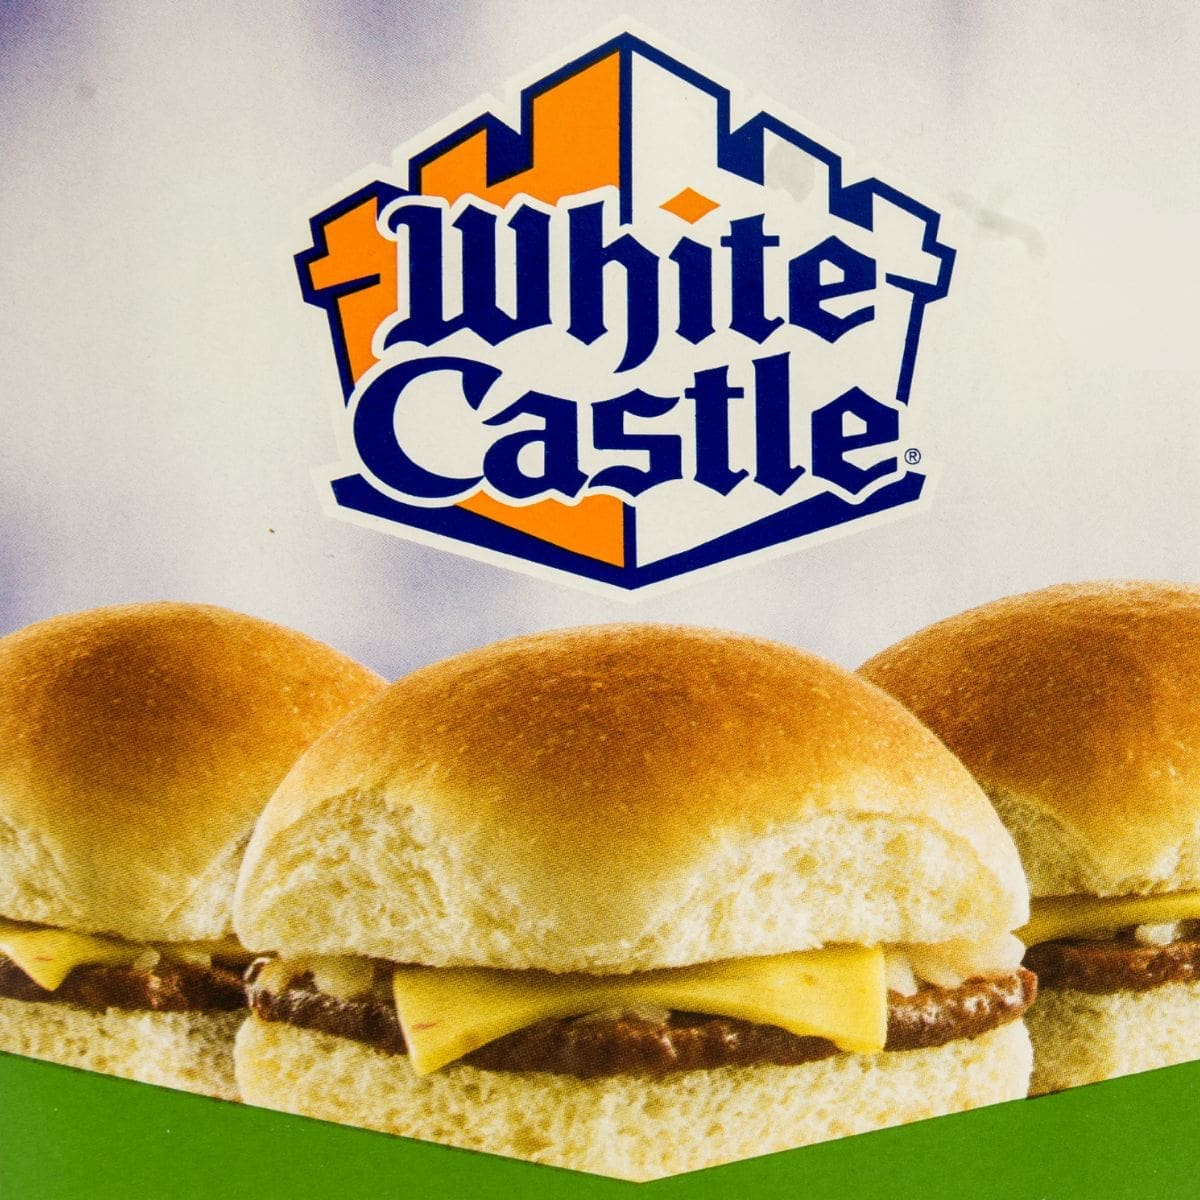 An image of three White Castle sliders with a White Castle logo.